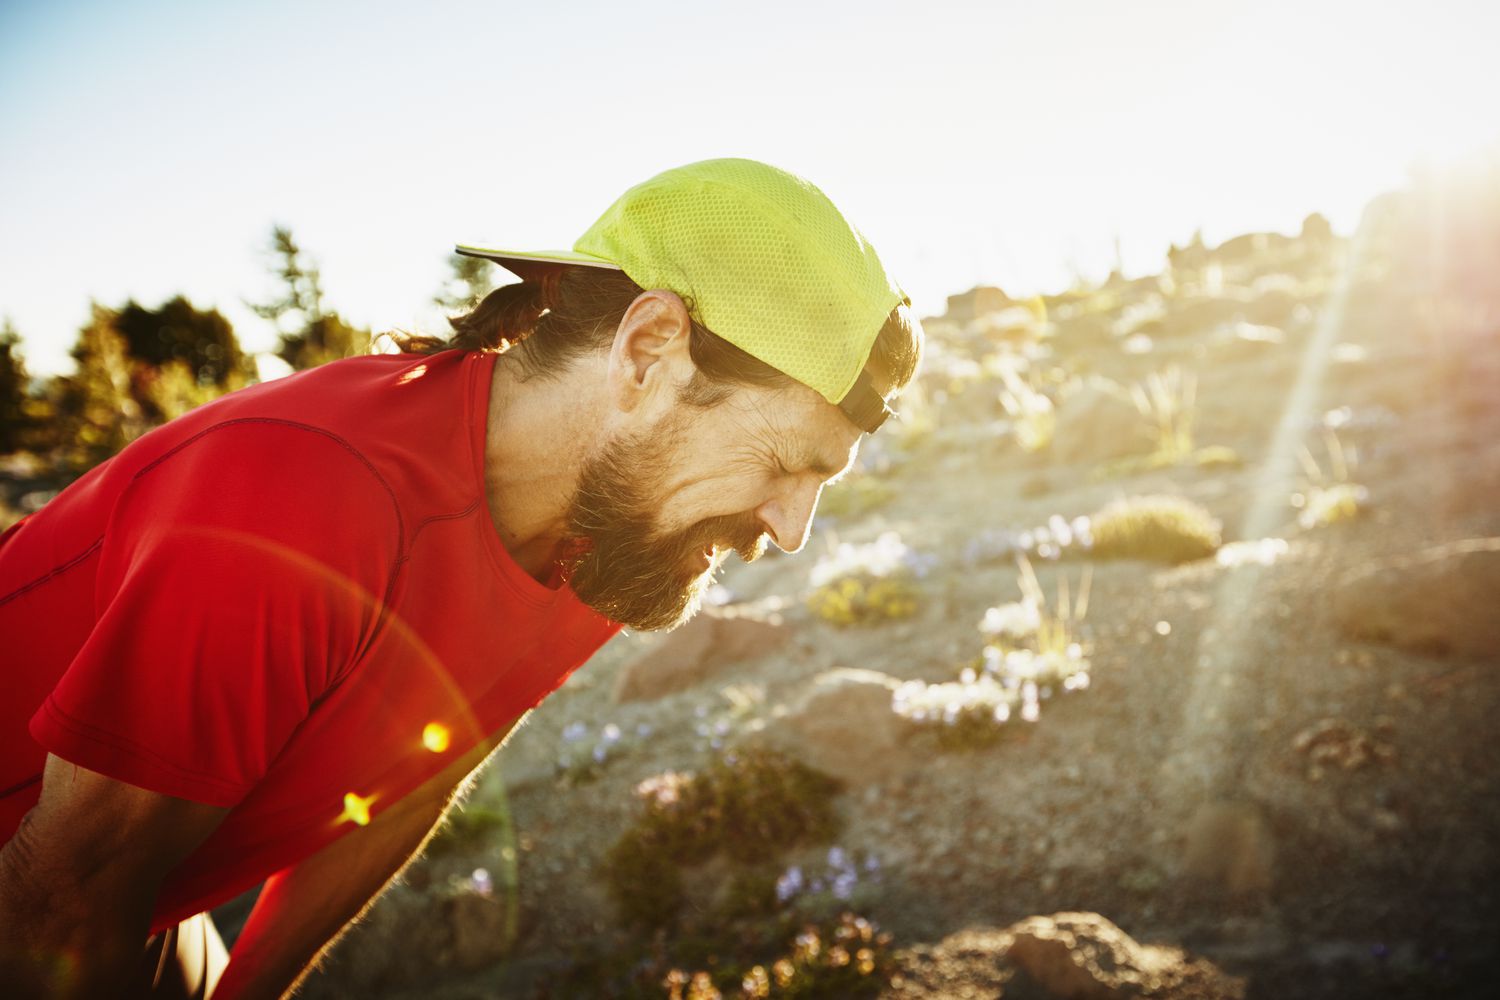 Trail runner breathing hard after run on mountain